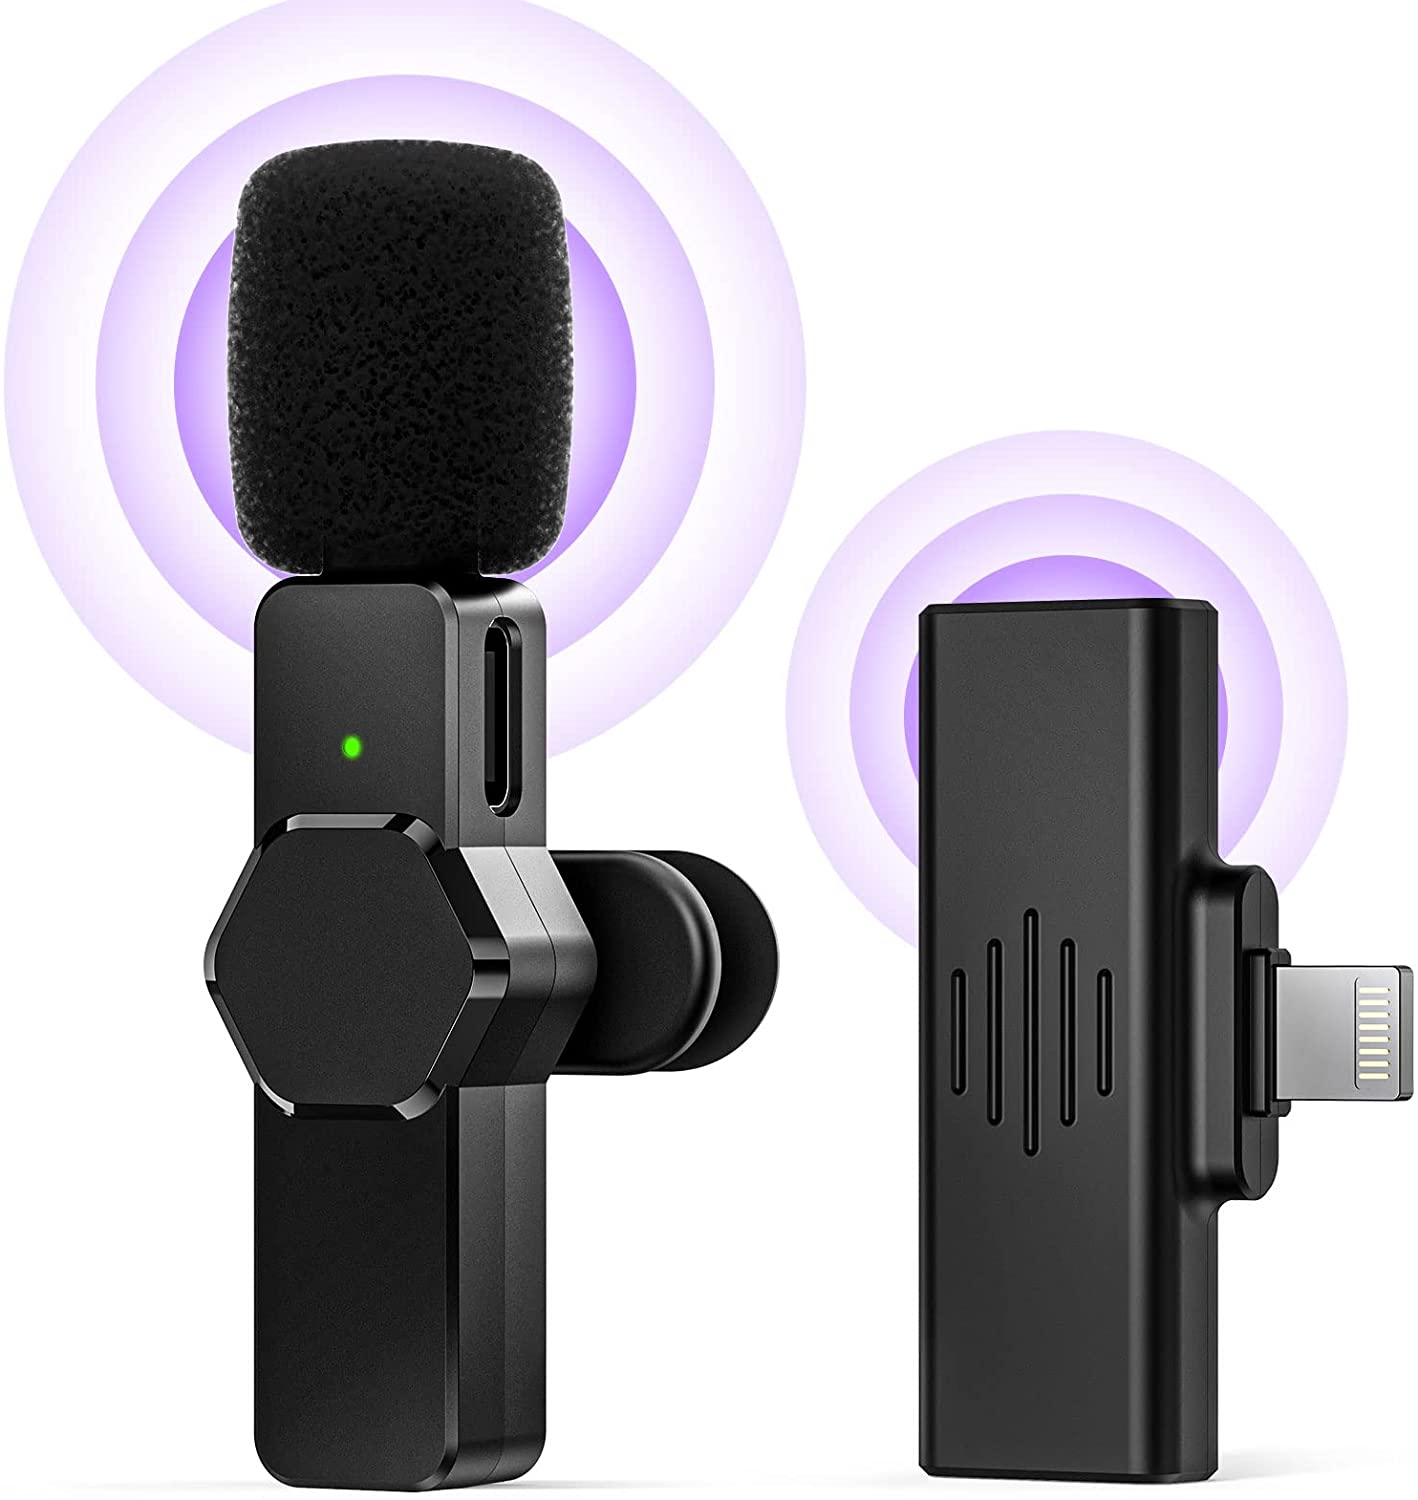 JSSEVN Wireless Lavalier Microphone Compatible with iPhone iPad, Plug-Play Wireless Mic for Recording, YouTube, TikTok, Facebook Live Stream, Noise Reduction Auto-Sync (NO APP or Bluetooth Needed).